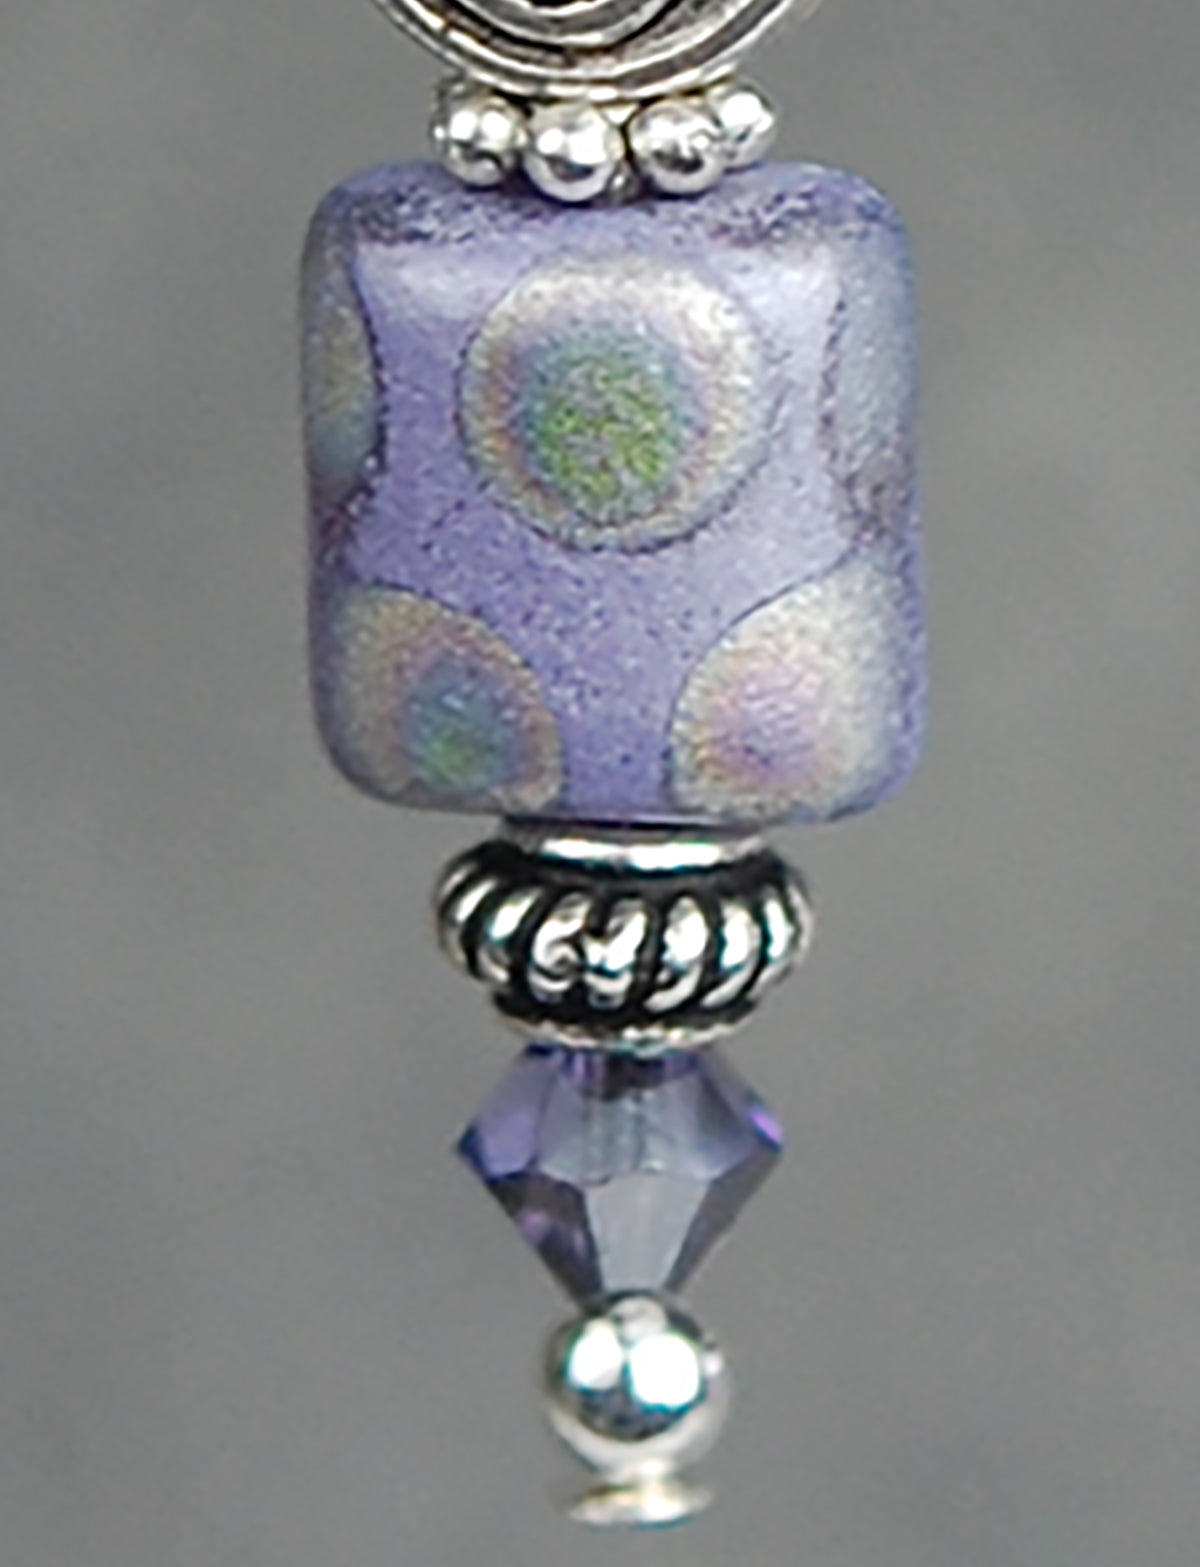 Lavender Quartz with Peacock Frosted Bead